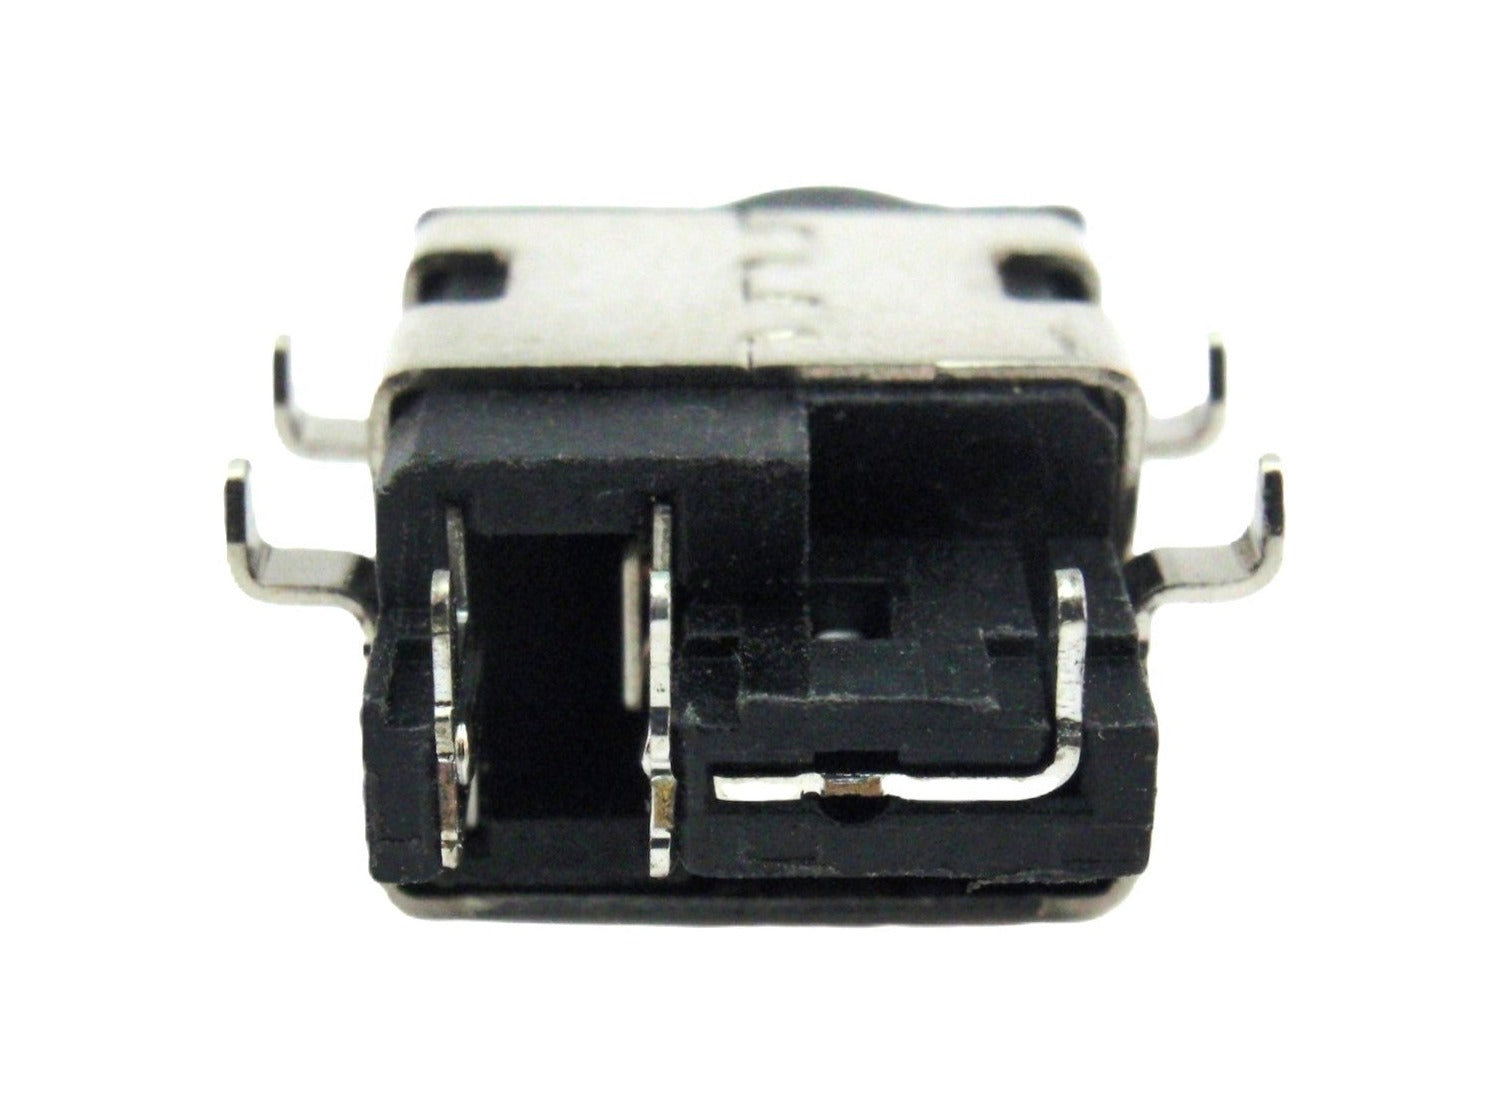 Samsung DC In Power Jack Charging Port Connector NP-SF310 NP-SF410 NP-SF411 NP-SF510 NP-SF511 NP-QX410 NP-QX411 NP-QX510 3722-002997